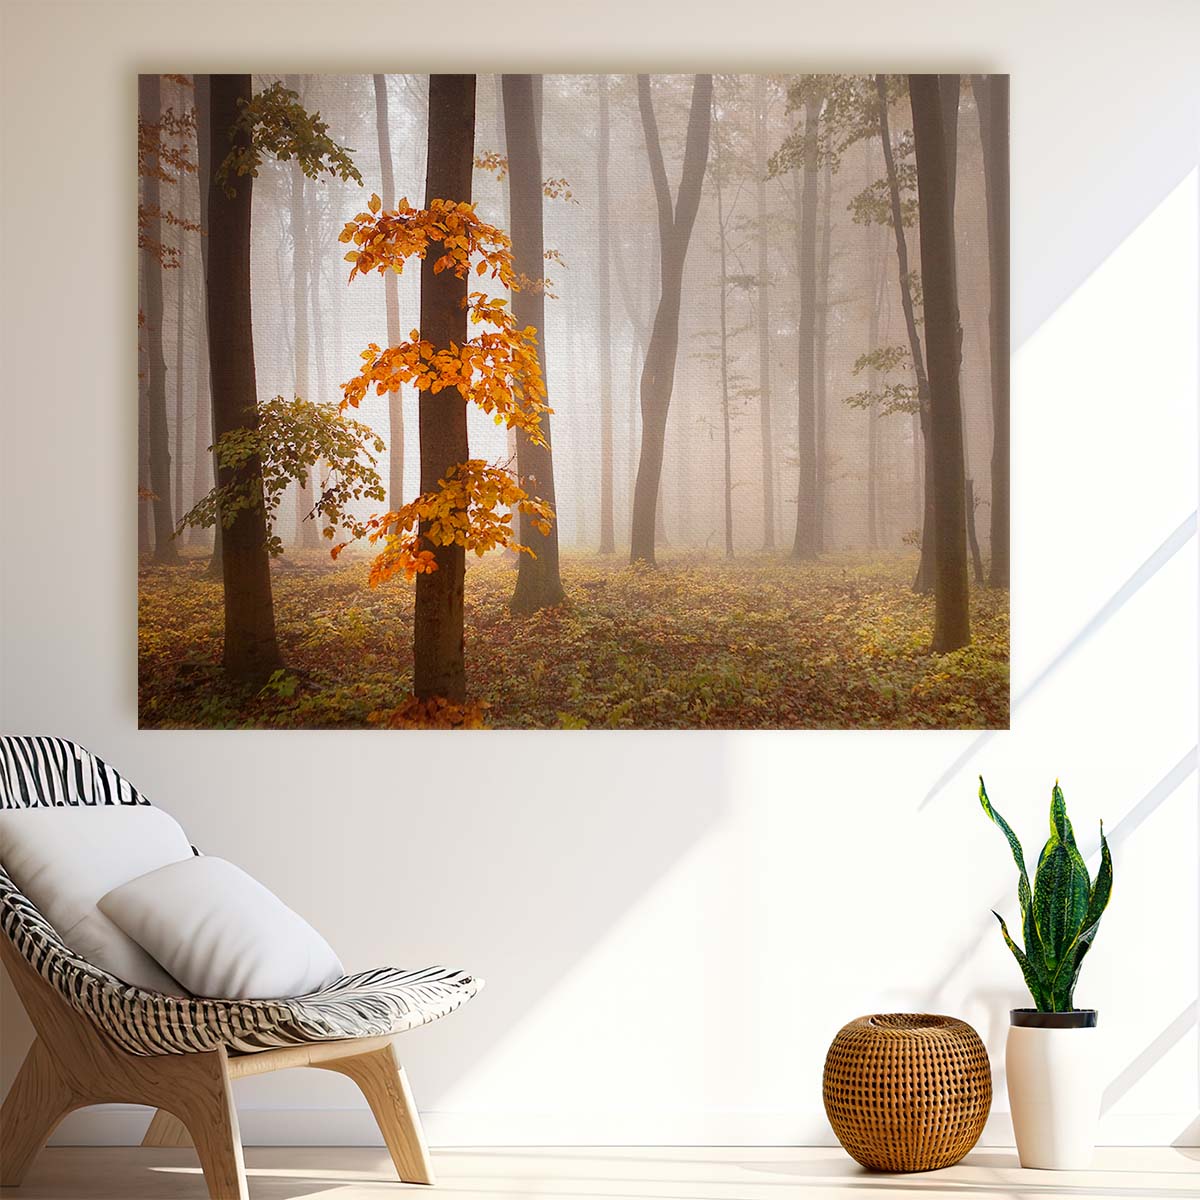 Misty Autumn Swabian Alb Forest Wall Art by Luxuriance Designs. Made in USA.